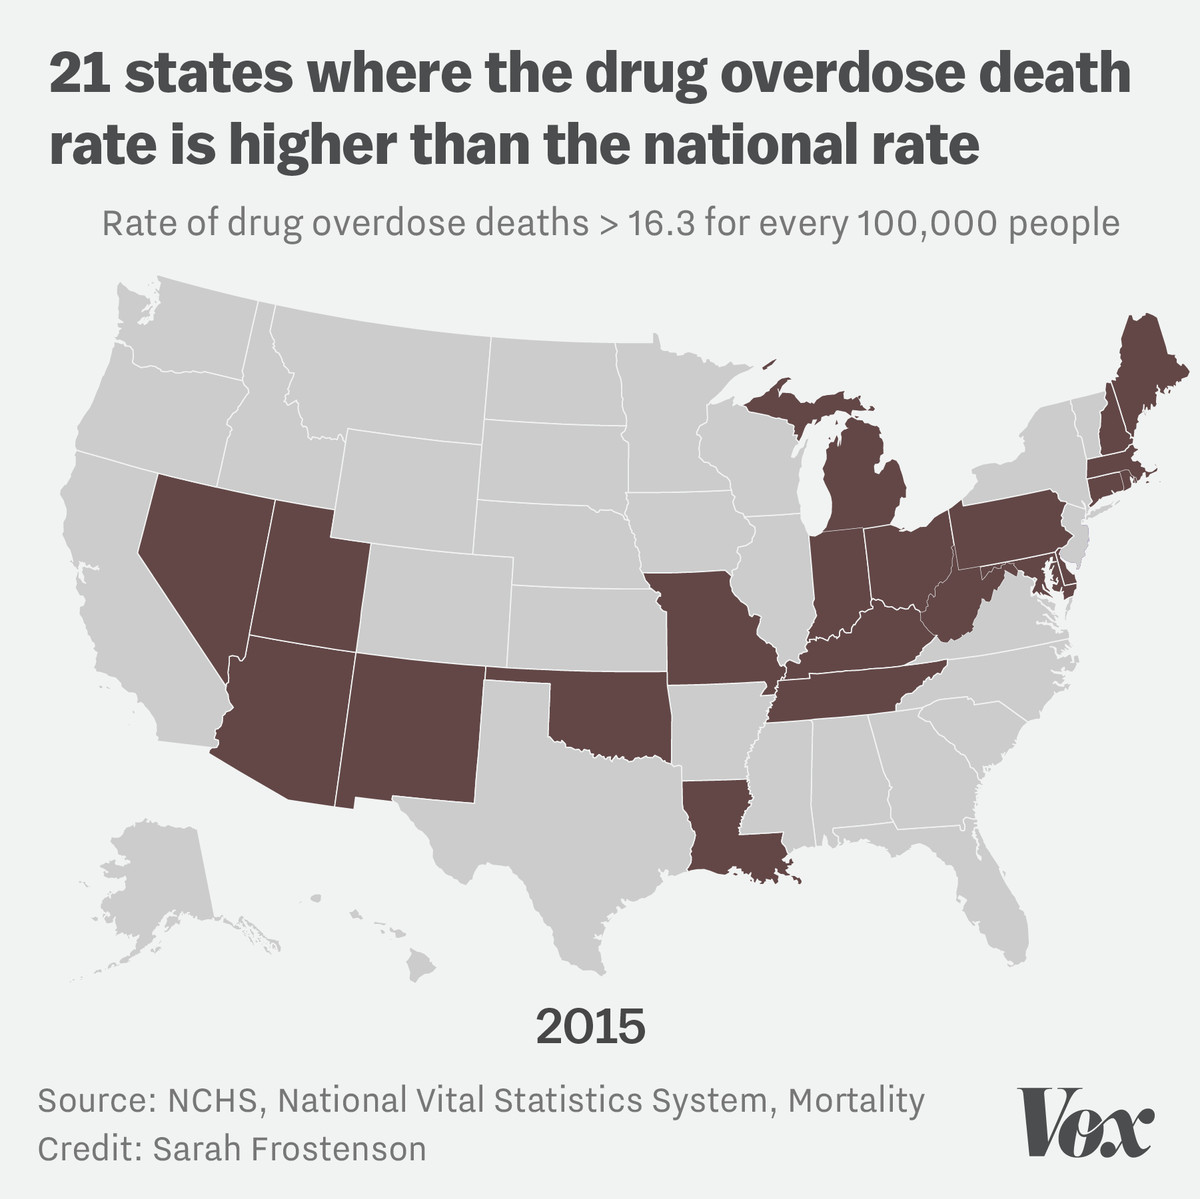 Map showing the 21 states that had a higher rate of drug overdose deaths than the national rate of 16.3 in 2015